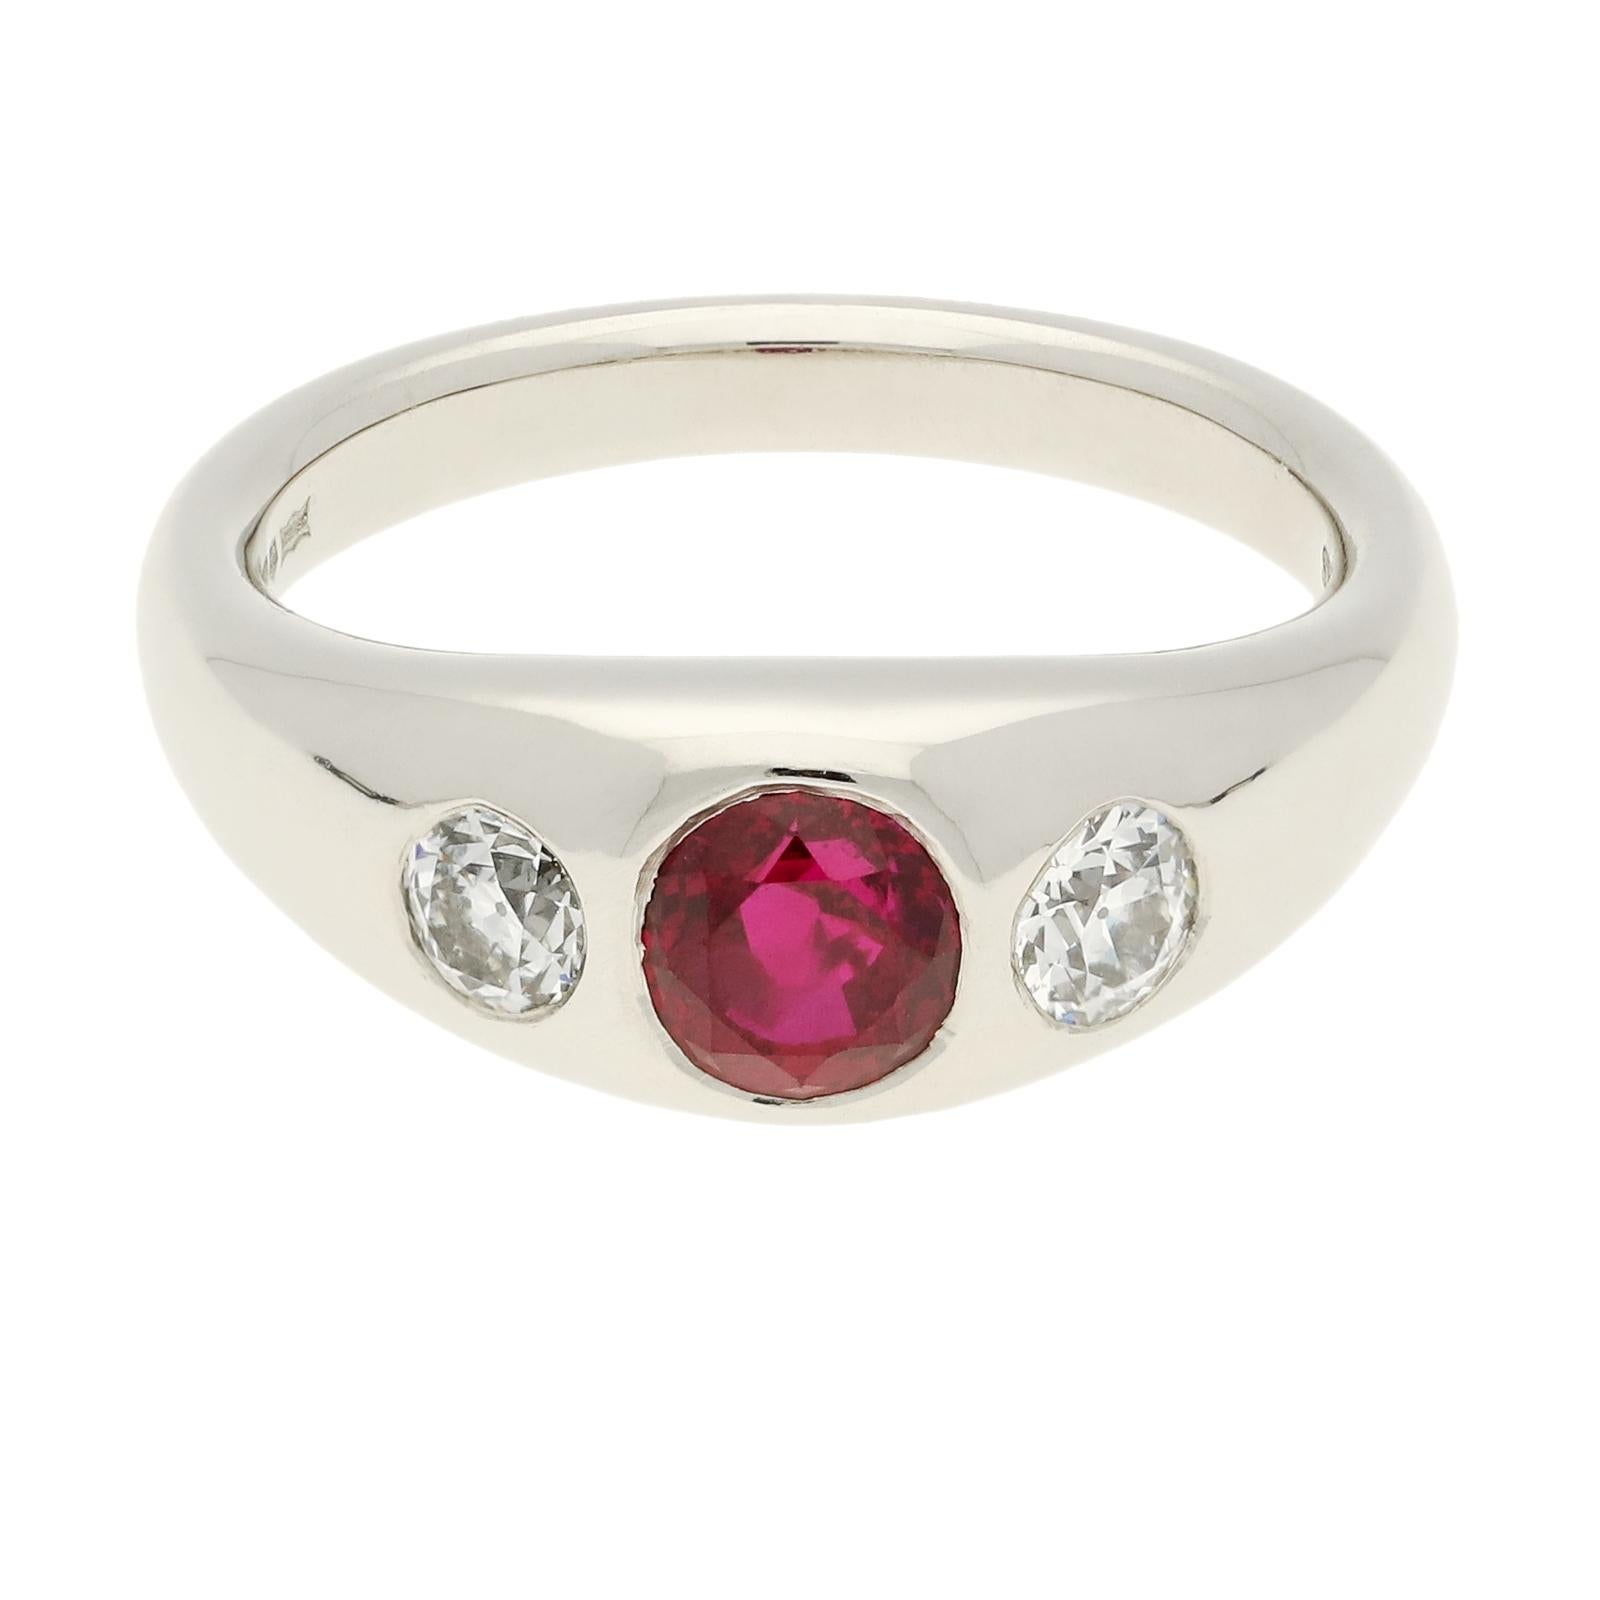 A beautiful platinum, ruby and diamond set ring by Hancocks, set flush to the centre with a lovely Burmese ruby weighing 1.09ct between two smaller old European brilliant cut diamonds weighing 0.40cts in total, within a hand crafted highly polished